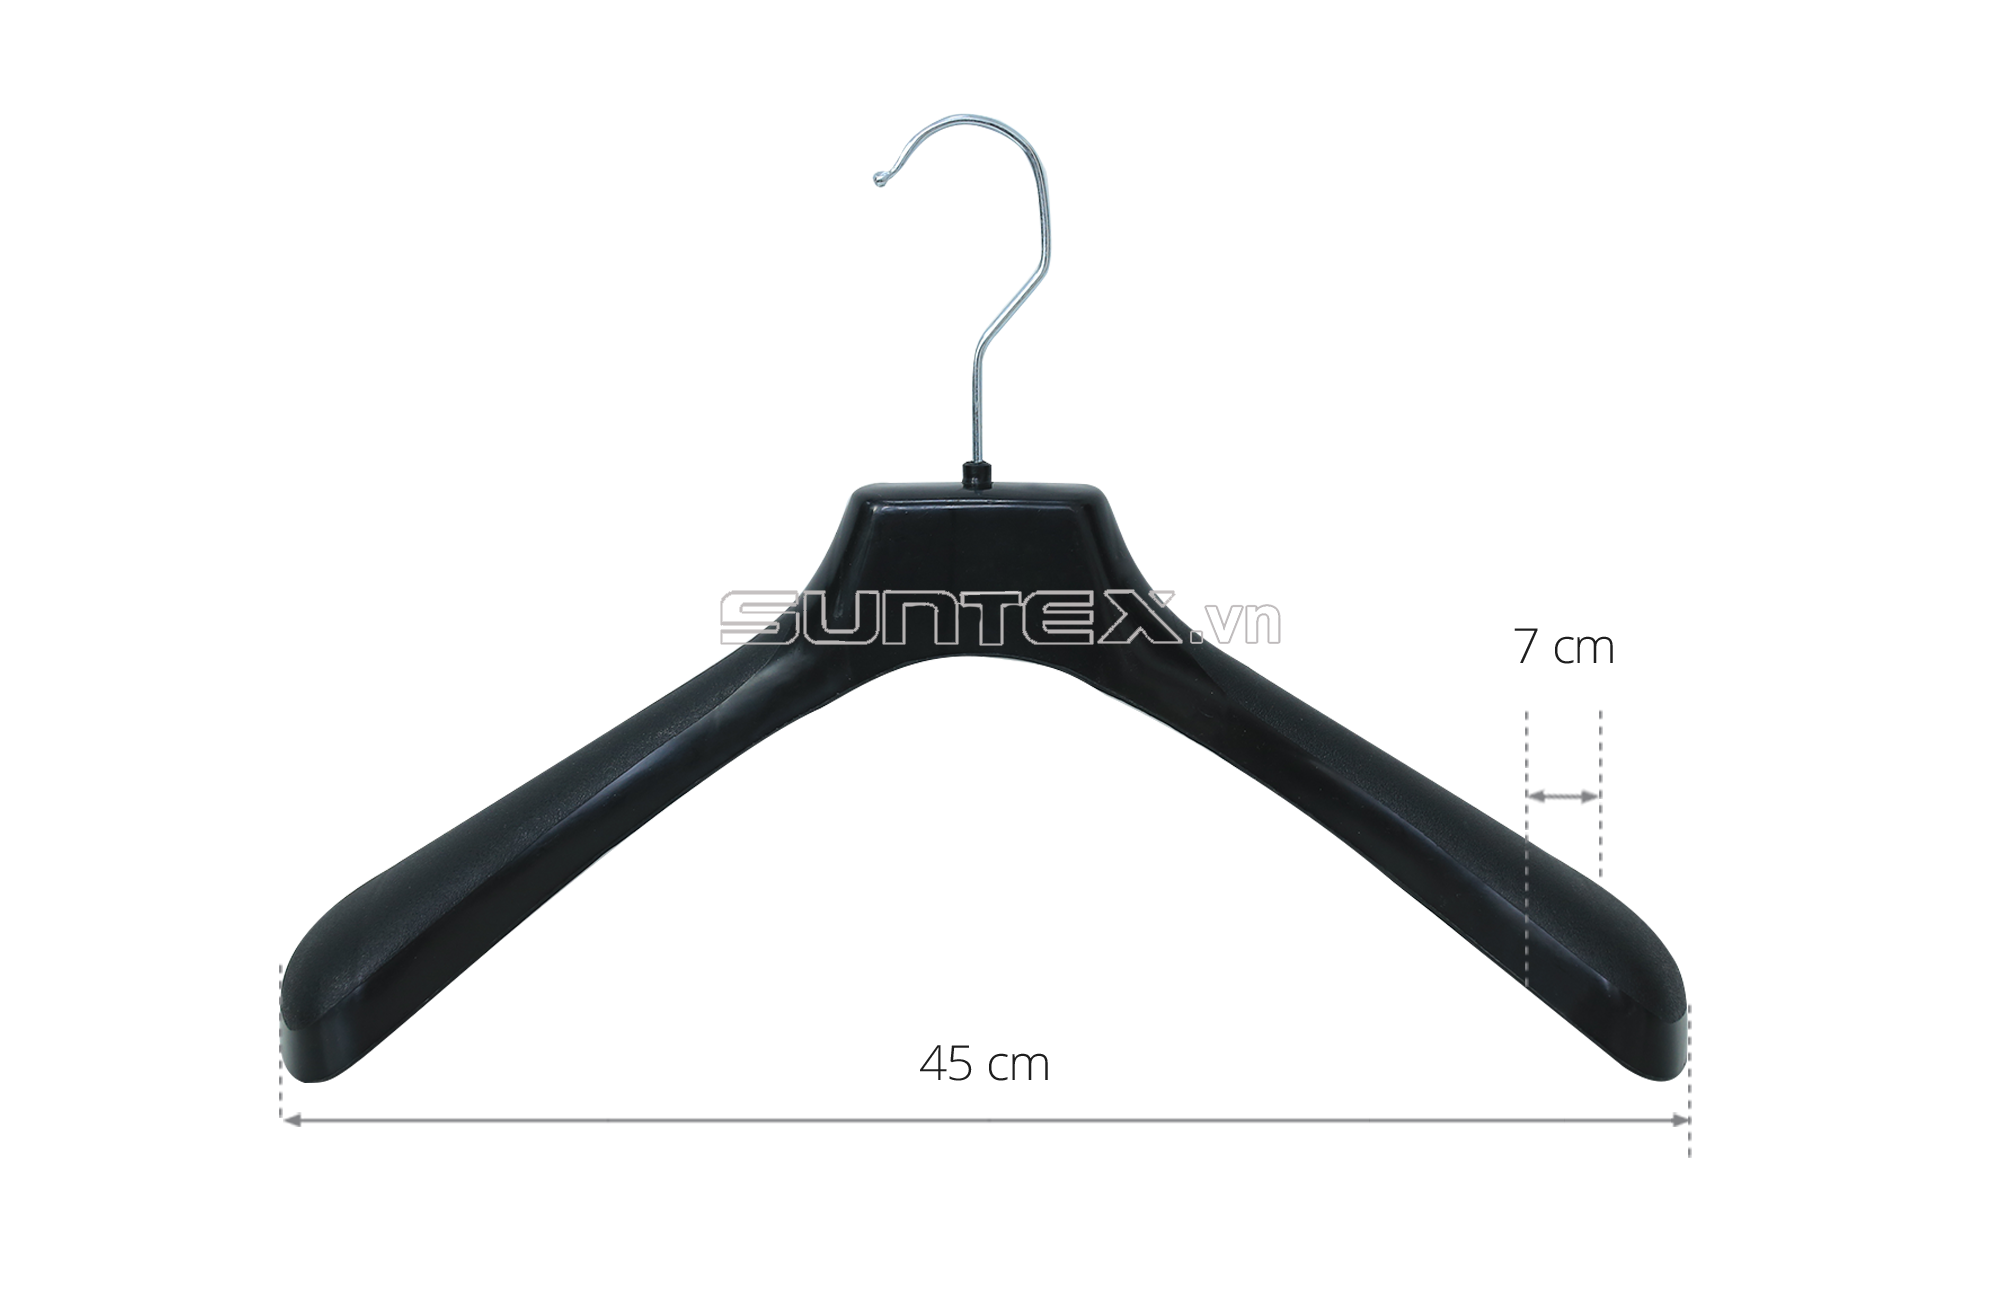 Hangers For Cloths Fast Delivery Suntex Wholesale Plastic Hangers Competitive Price Customized Anti-Slip Made In Vietnam